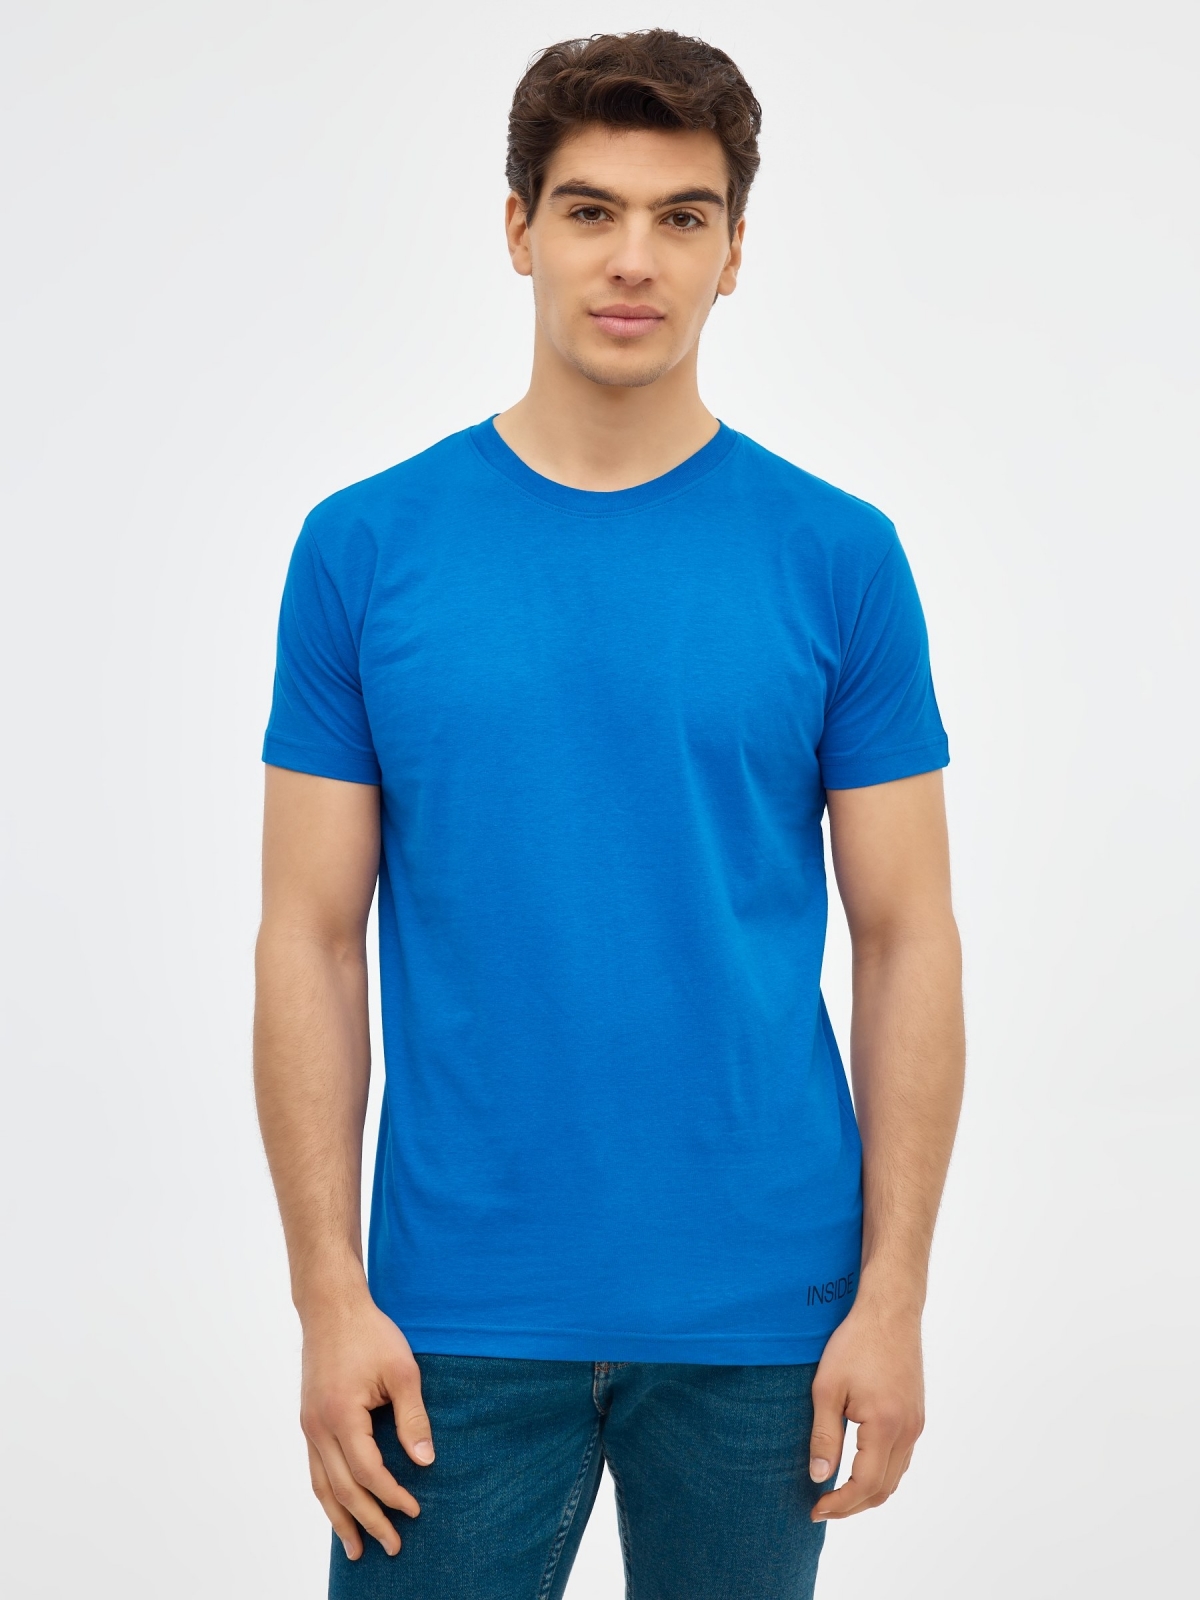 Basic short sleeve t-shirt ducat blue middle front view